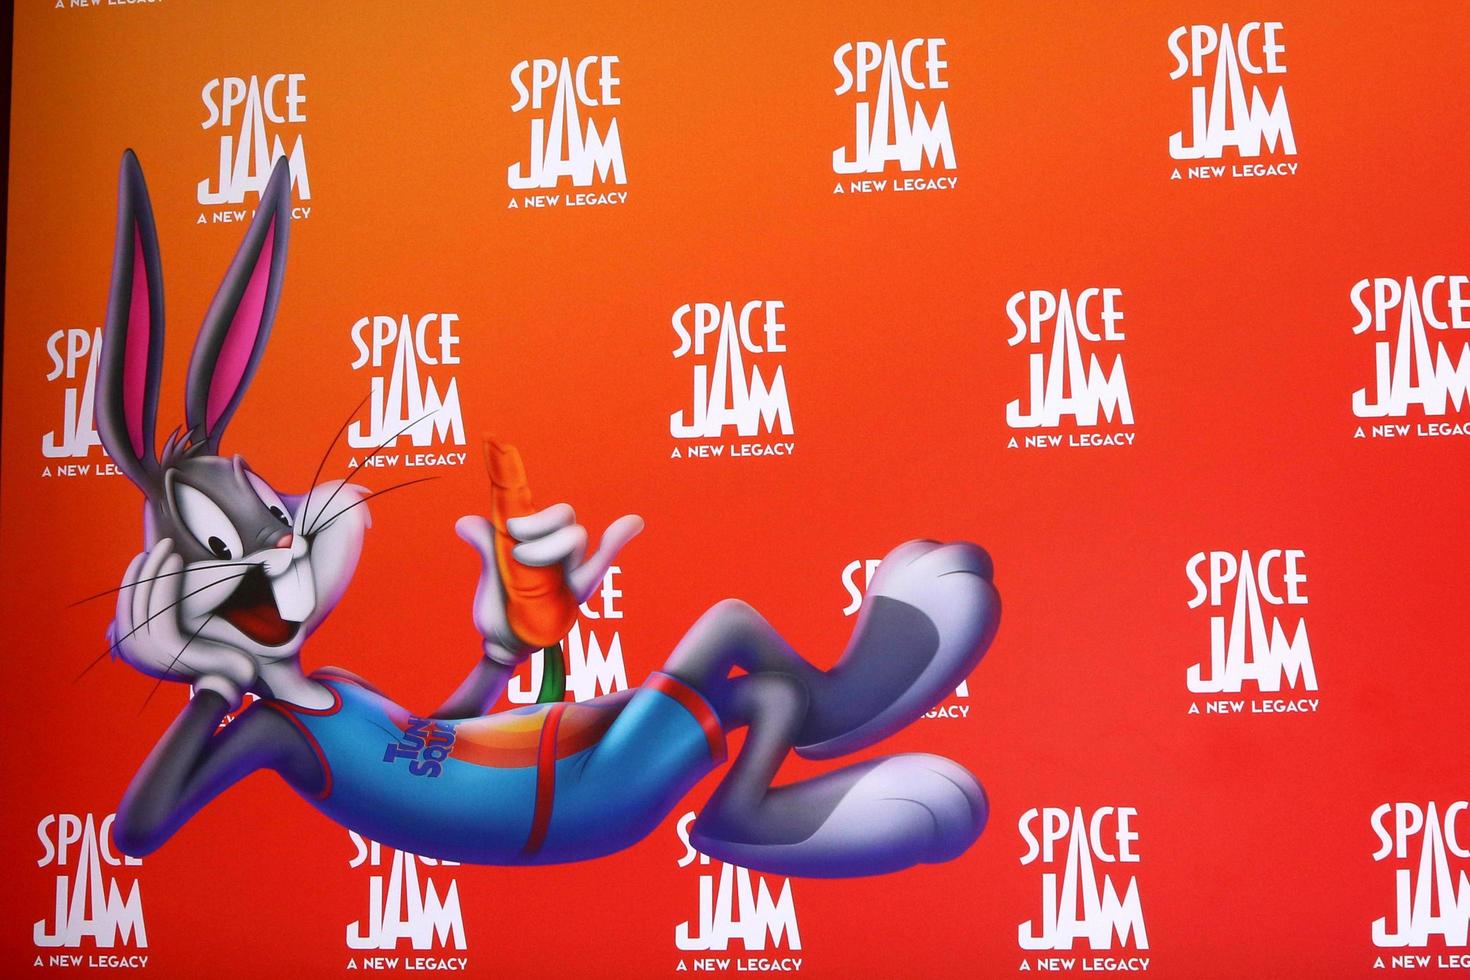 LOS ANGELES  JUL 12 - General Atmosphere at the Space Jam - A New Legacy Premiere at the Microsoft Theater on July 12, 2021 in Los Angeles, CA photo